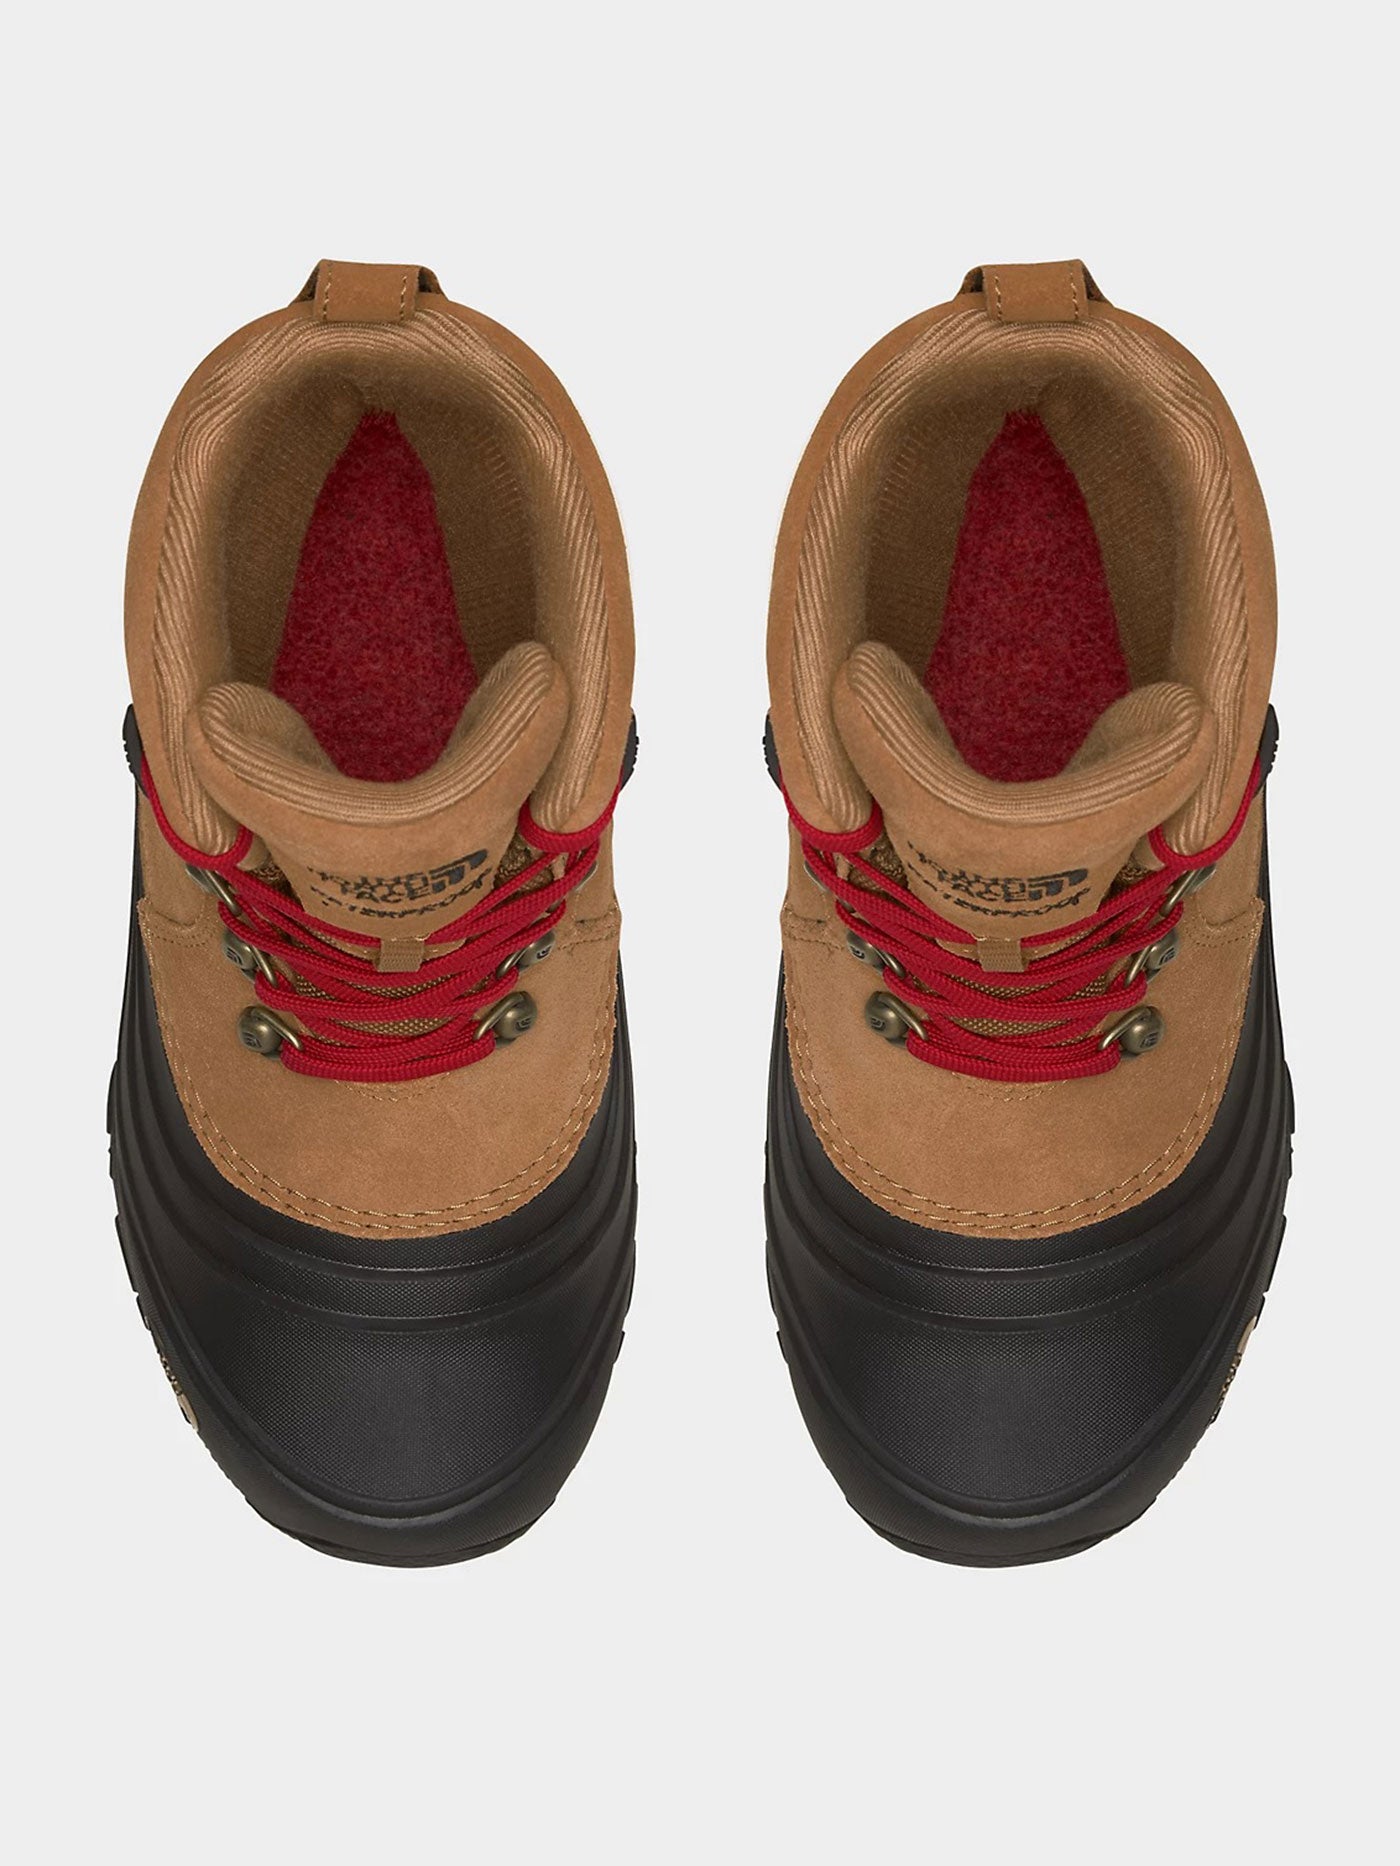 The North Face Chilkat Lace ll Winter Boots